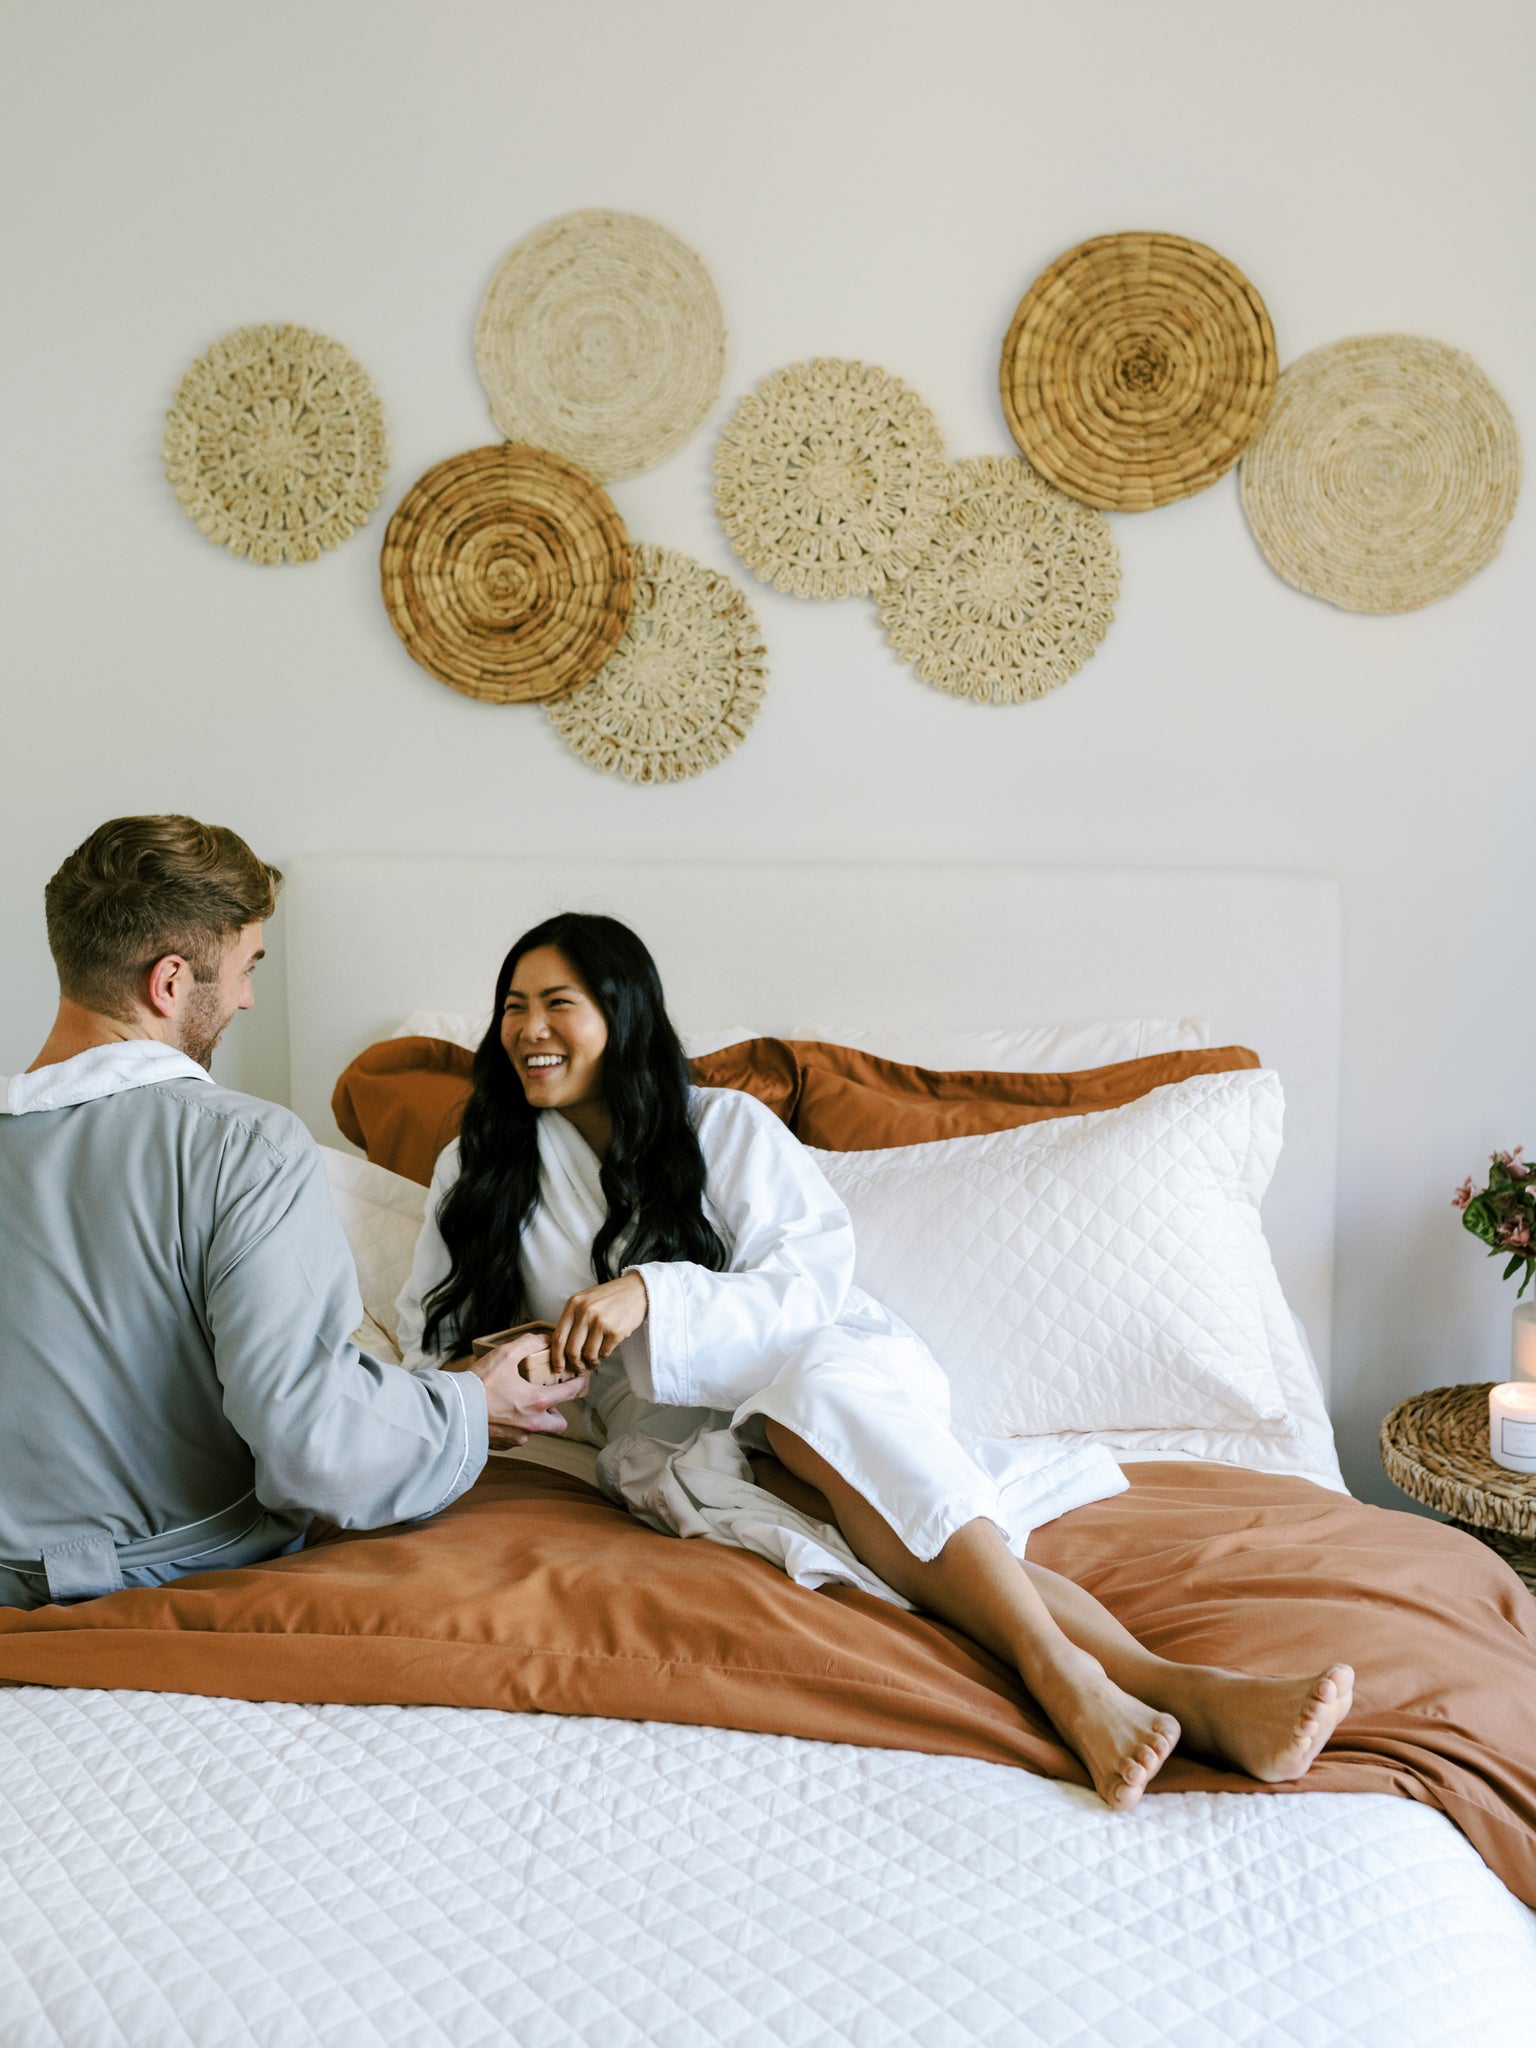 Couple enjoying a romantic staycation enjoying breakfast in bed together